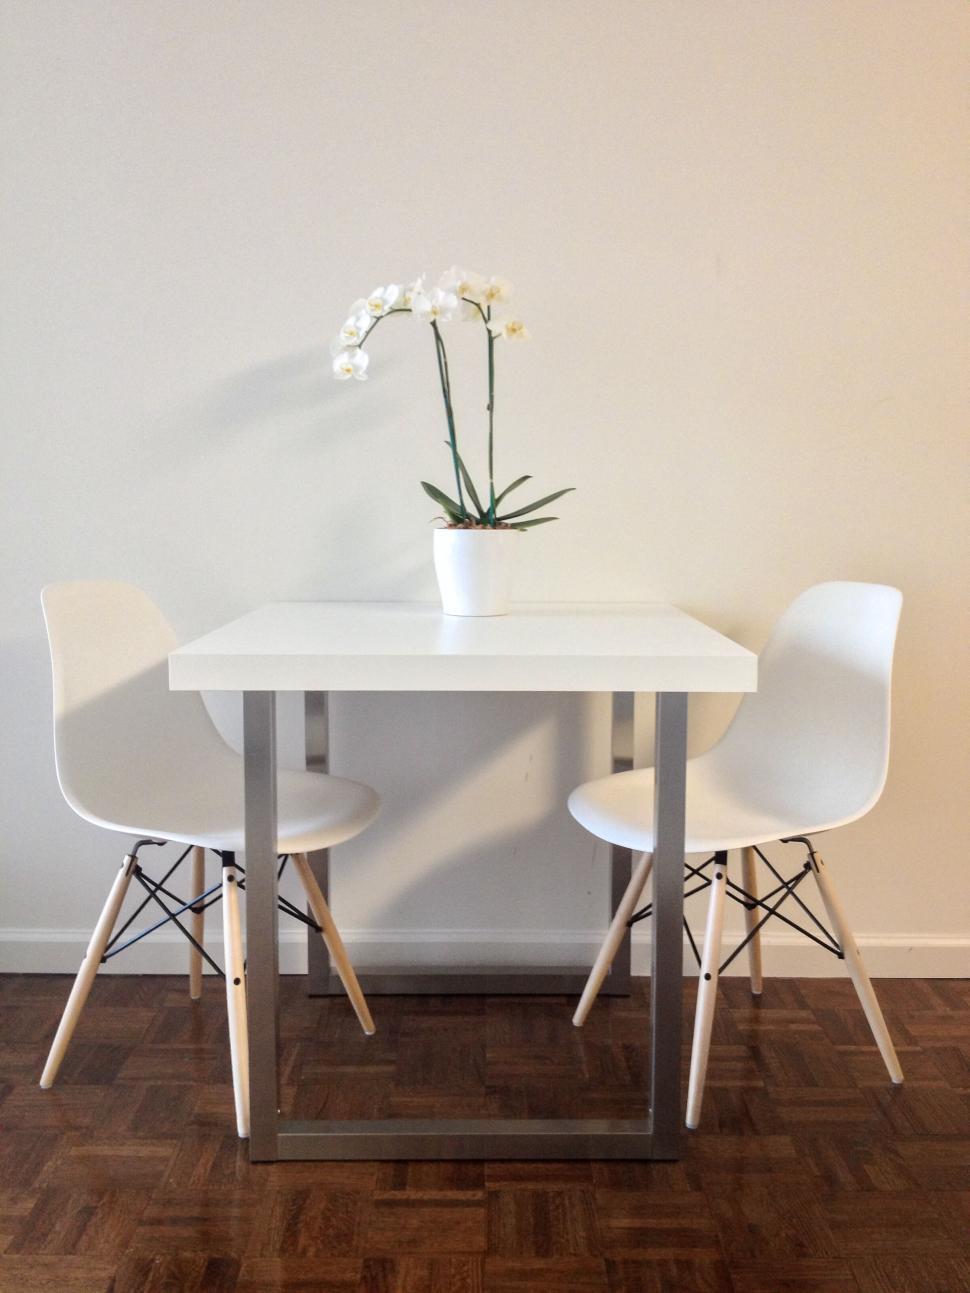 Free Image of Minimalist white dining table with chairs 